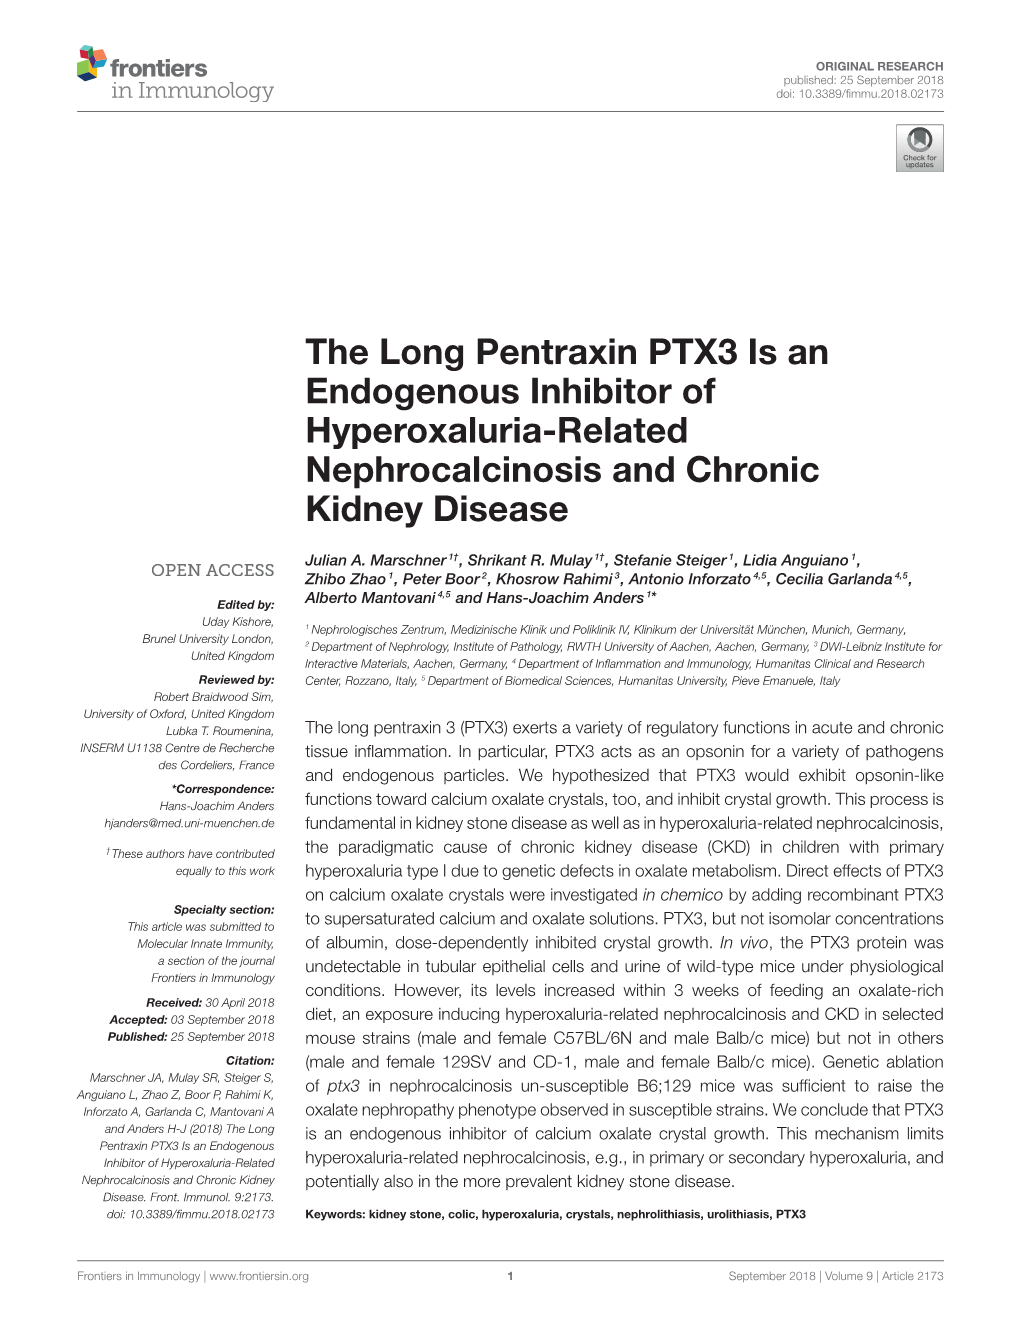 The Long Pentraxin PTX3 Is an Endogenous Inhibitor of Hyperoxaluria-Related Nephrocalcinosis and Chronic Kidney Disease